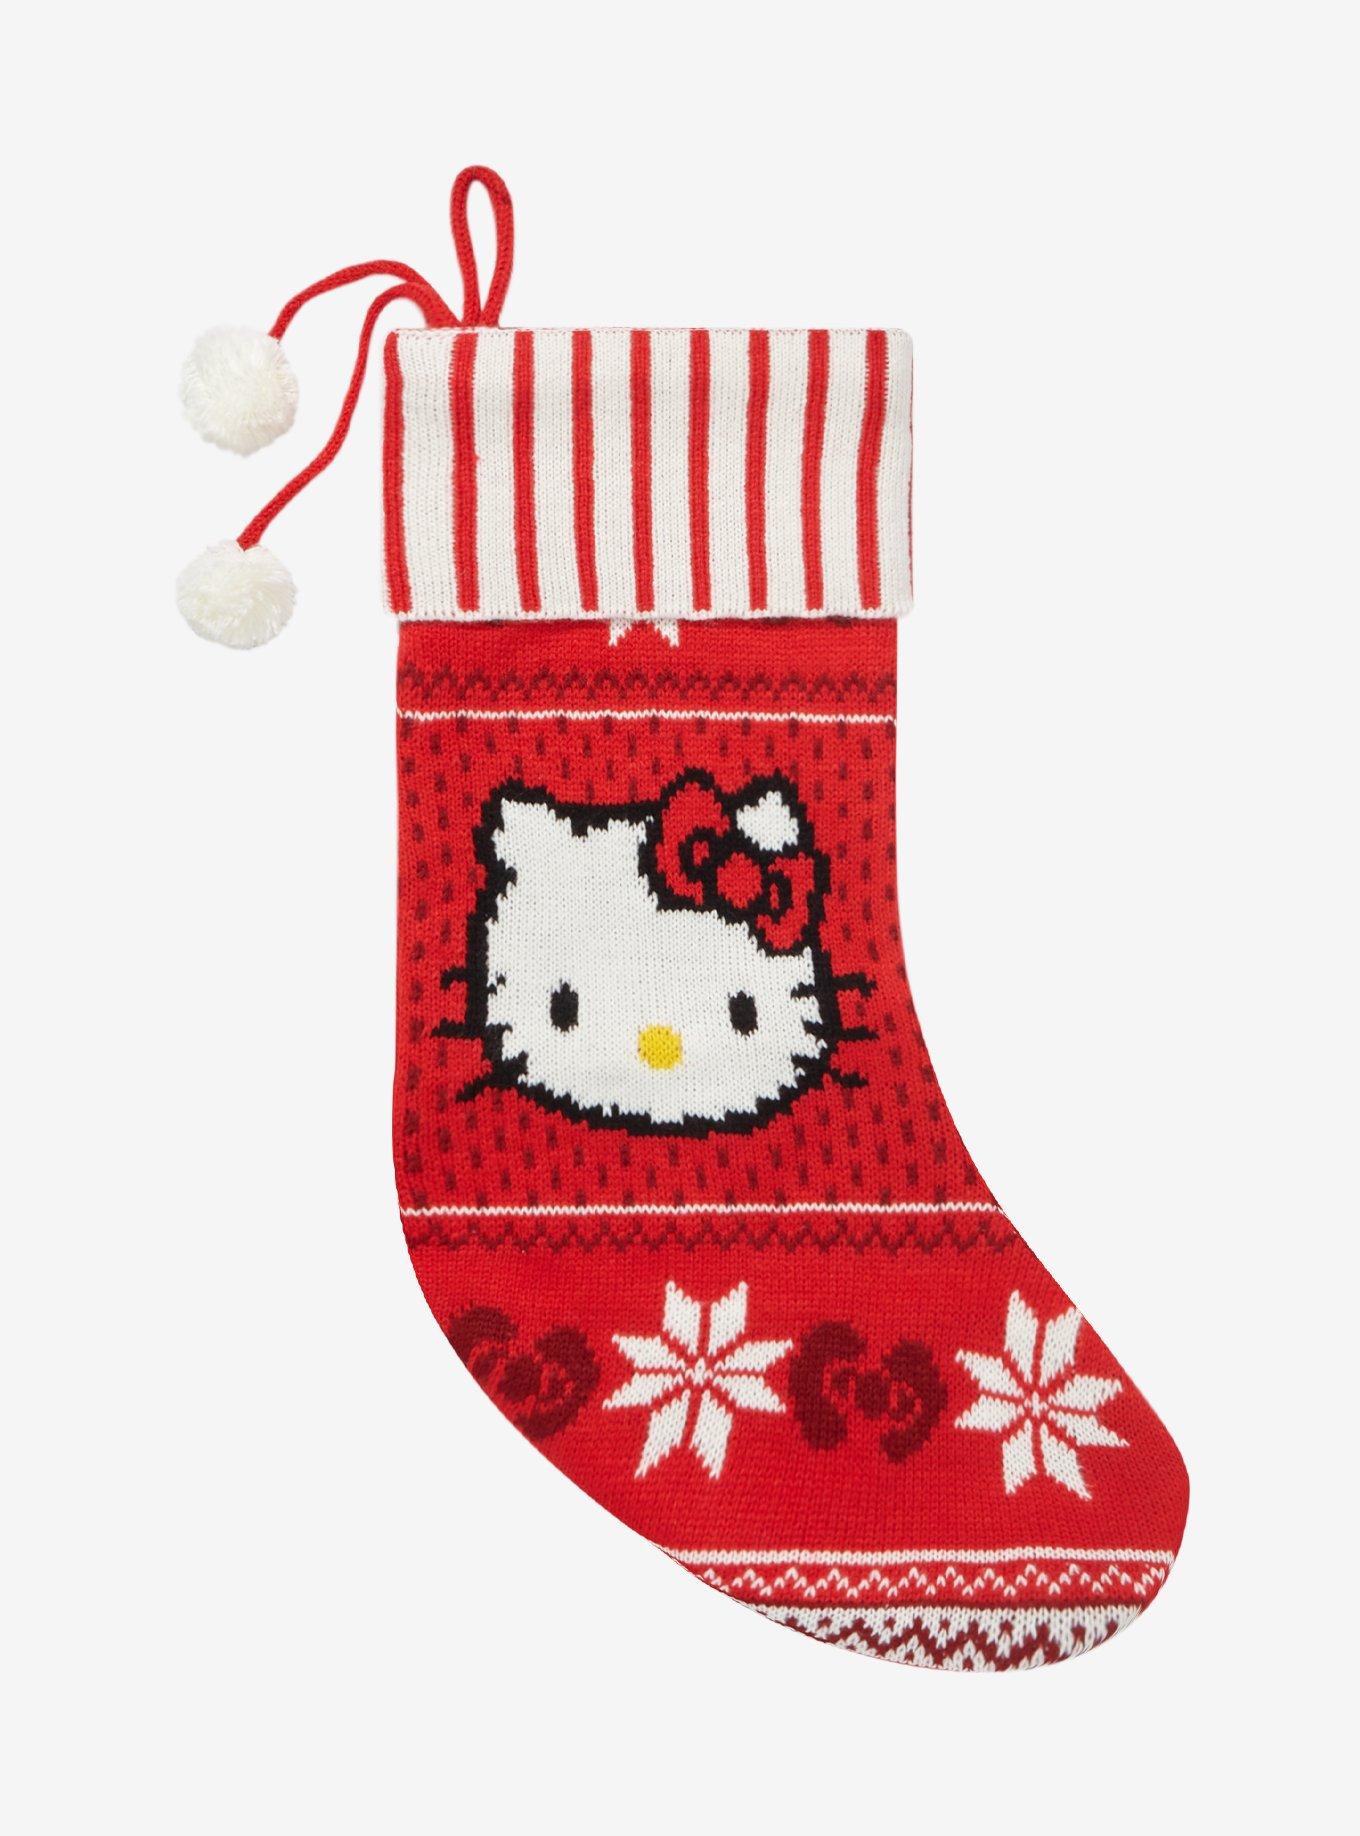 Shop Hello Kitty Stocking For Women with great discounts and